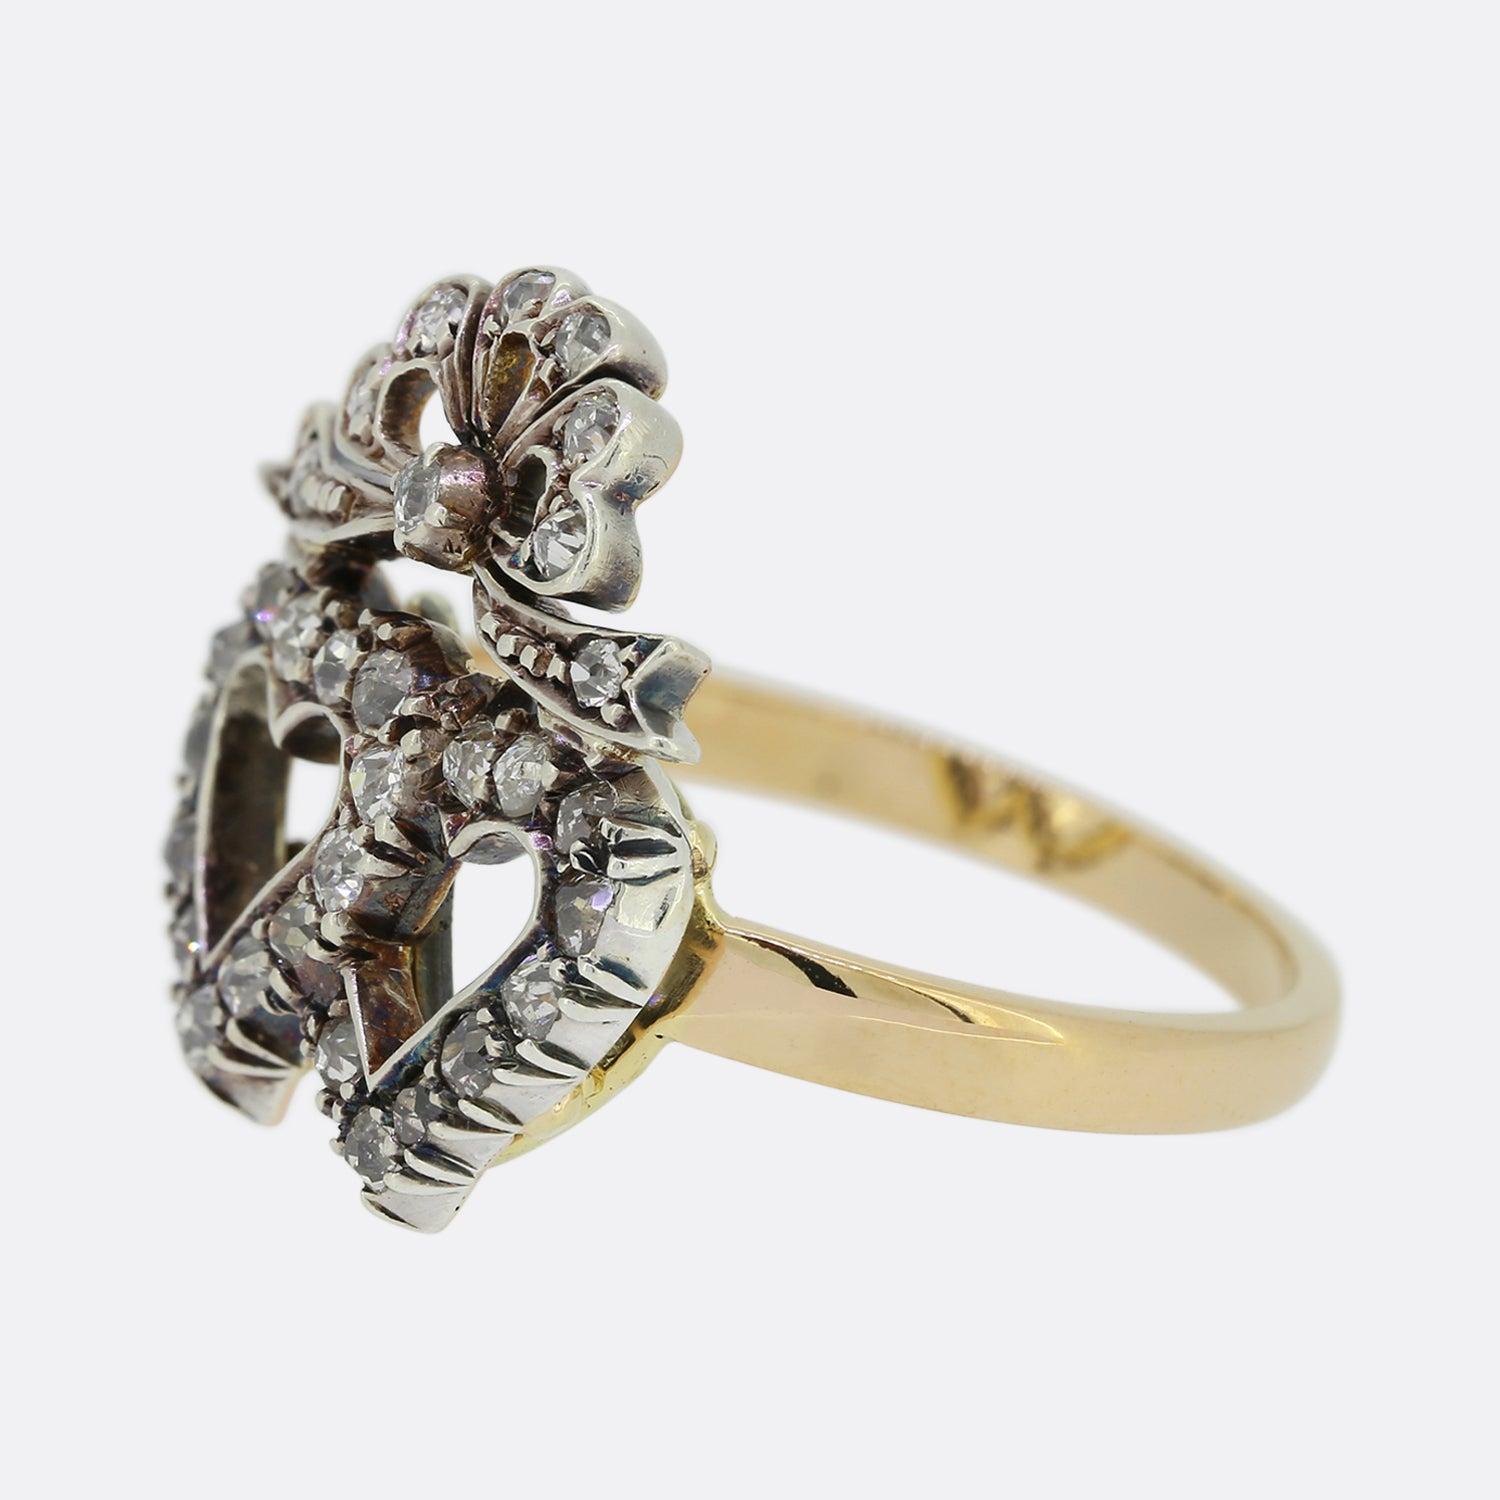 This is a lovely antique double heart ring dating back to the Victorian era. The ring features two open interlocking hearts which have been silver set with a vast array of round old cut diamonds on a yellow gold backing and band. 

Double heart